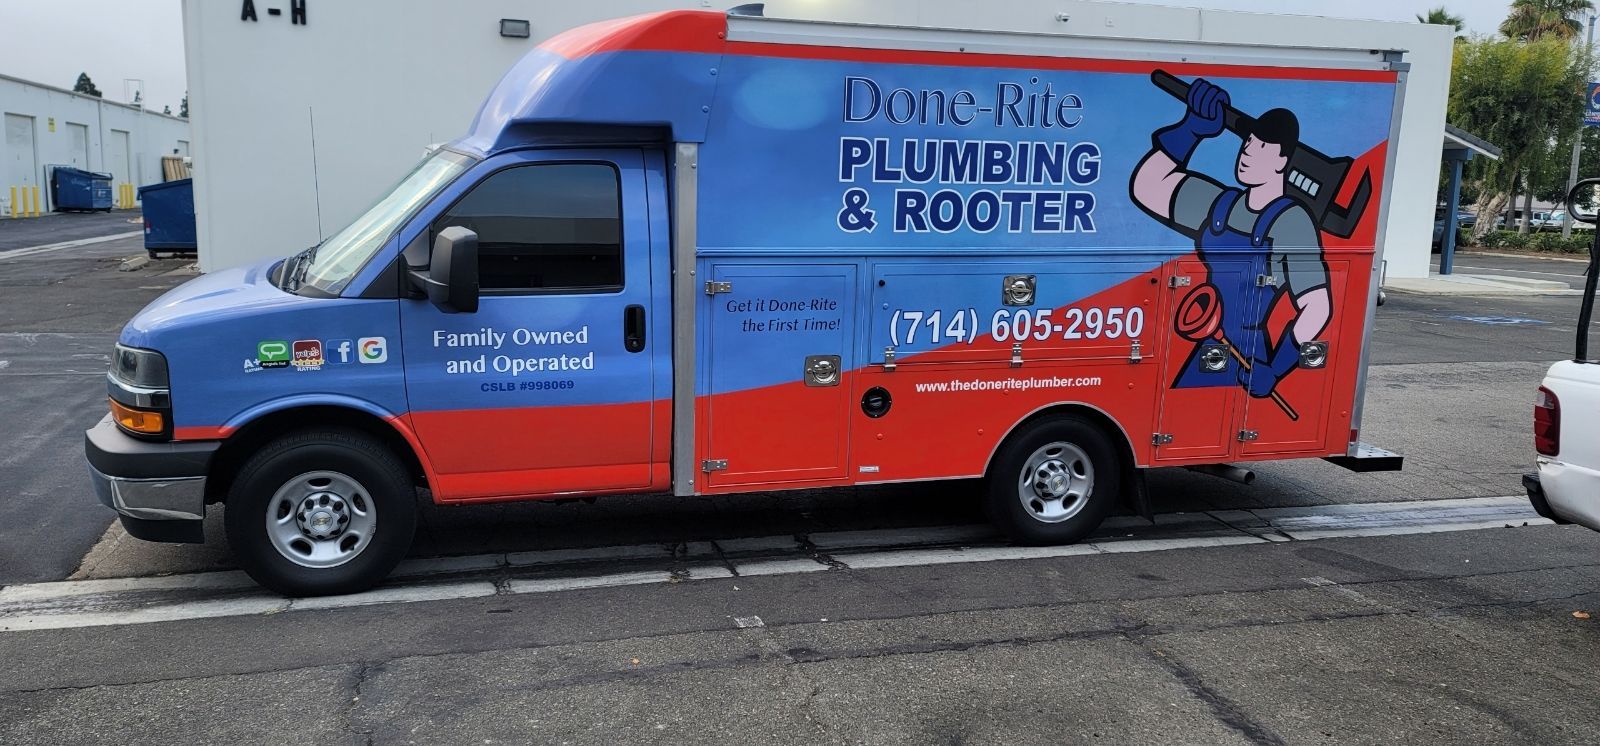 Done-Rite Plumbing & Rooter Vehicle Service